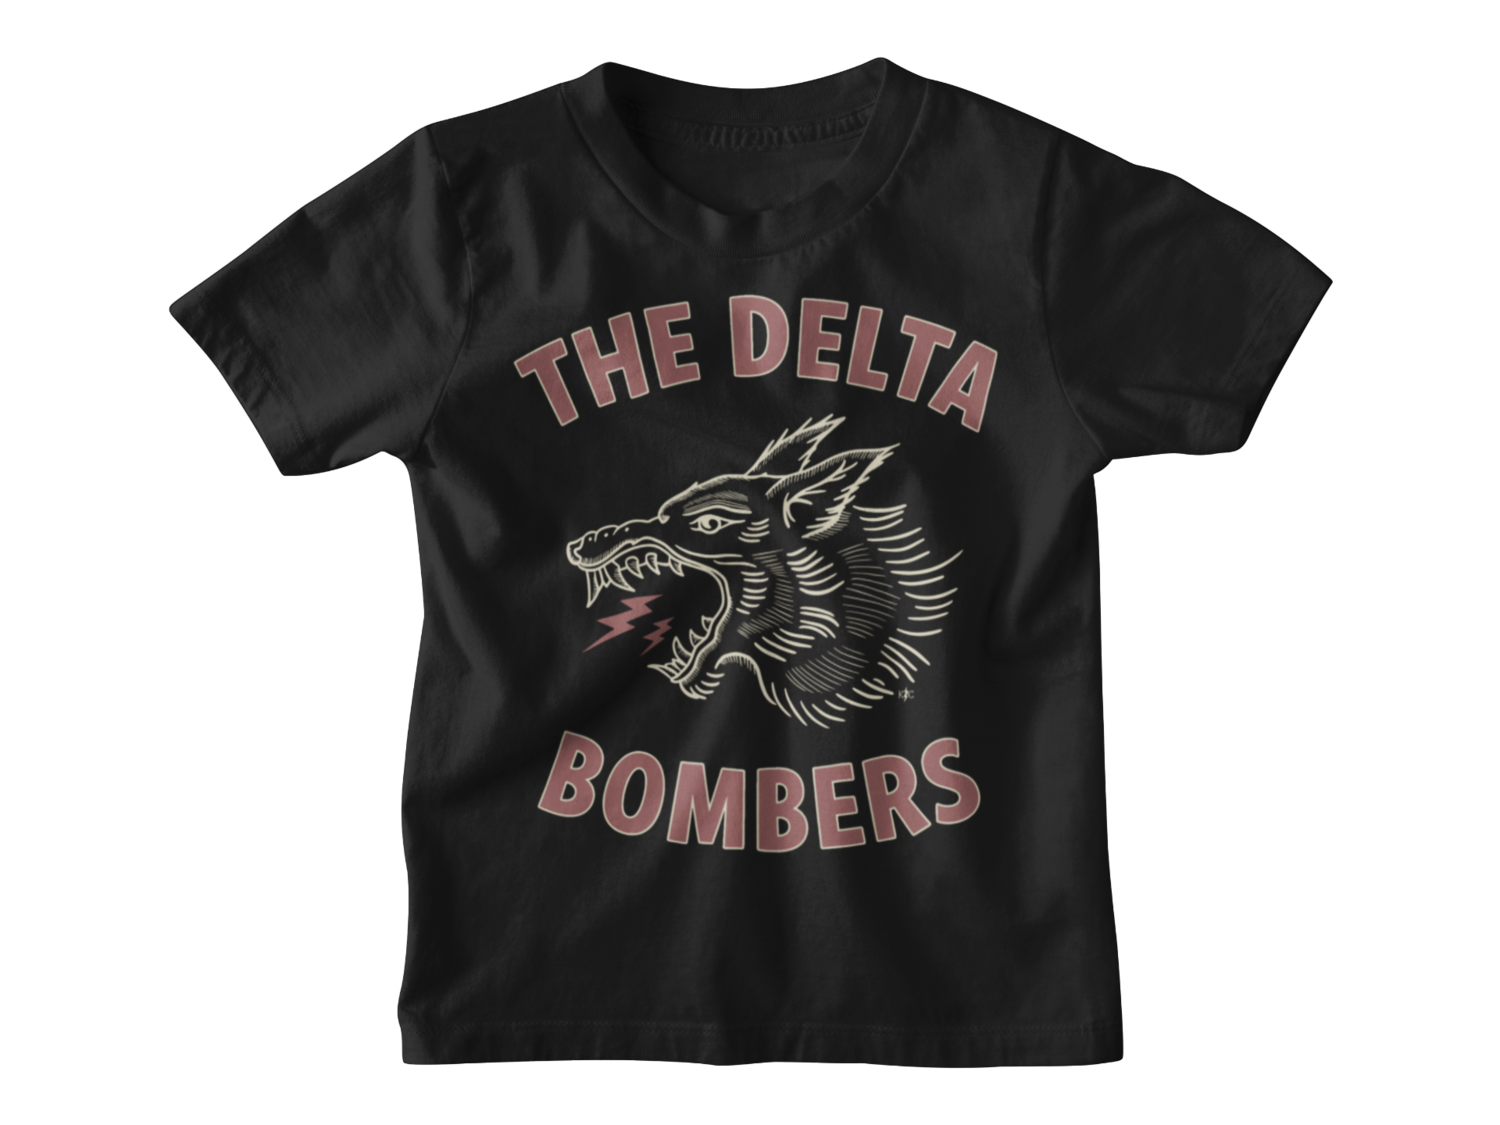 THE DELTA BOMBERS "Red wolf" T-SHIRT KIDS